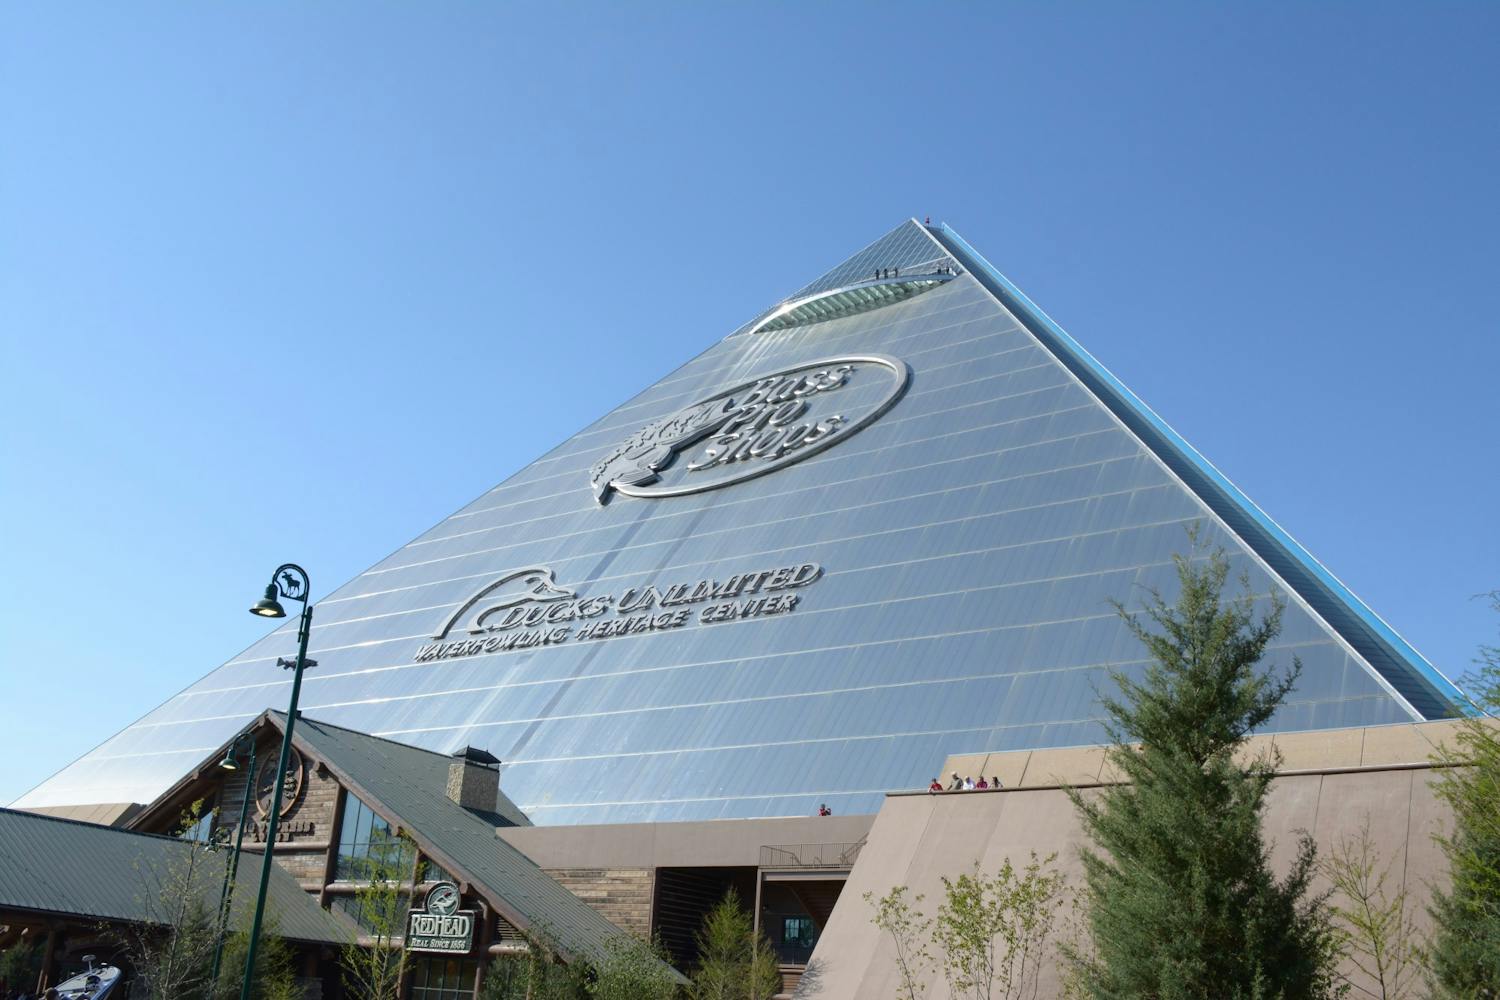 Bass Pro Shops in Memphis, Tennessee